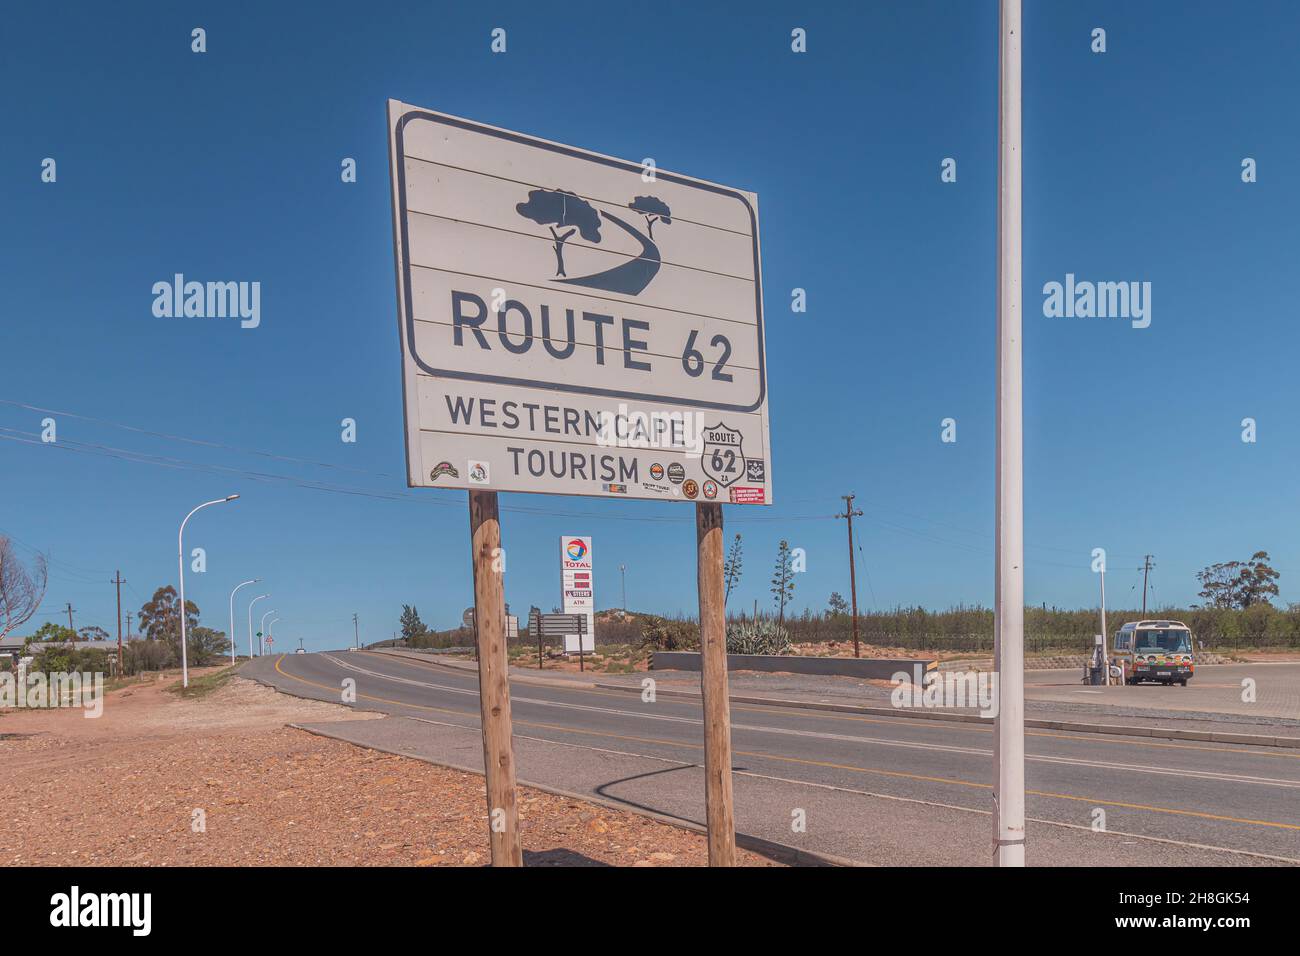 Road sign of Route 62 or R62 at Ladismith in Western Cape, South Africa. The road route is South Africa's scenic alternative tourist route. Stock Photo